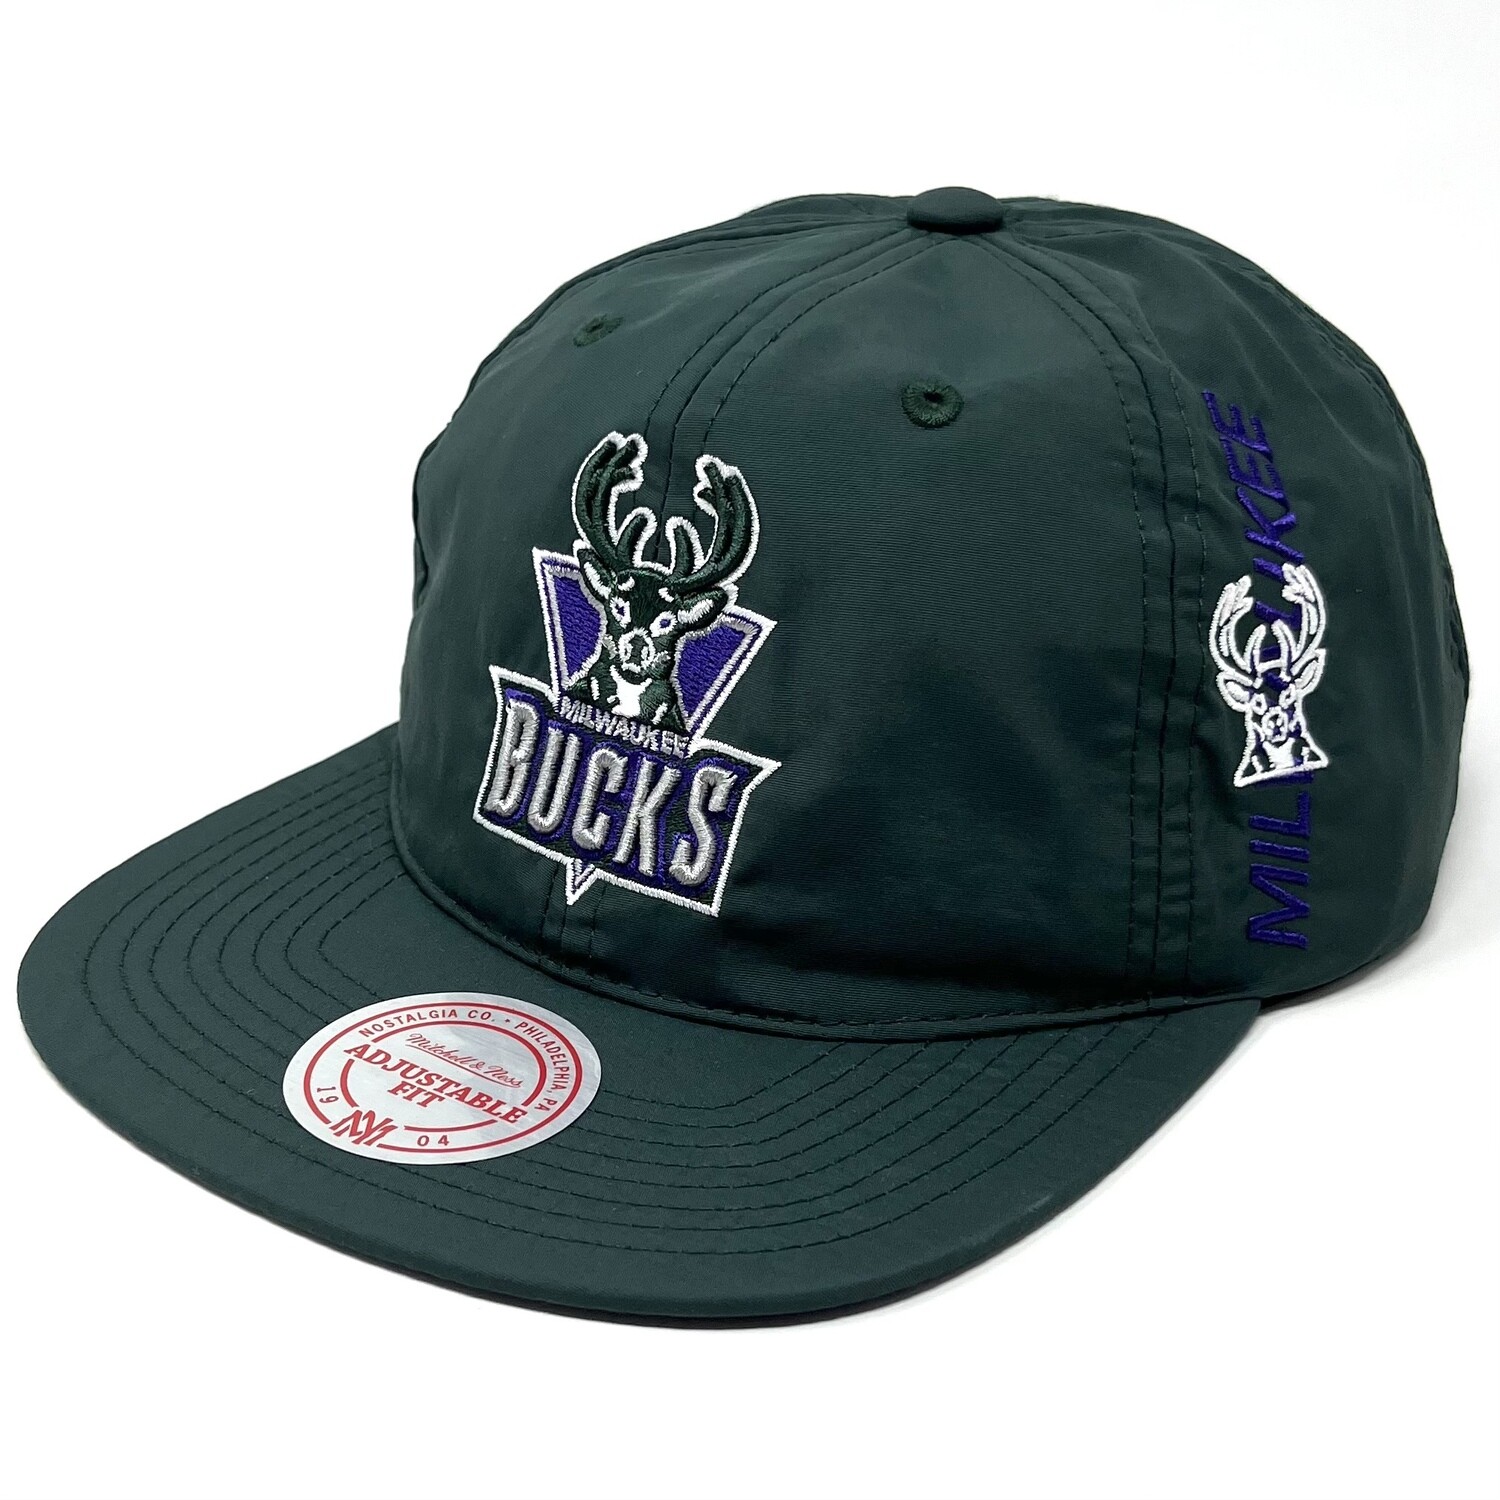 MITCHELL & NESS: BAGS AND ACCESSORIES, MITCHELL AND NESS MILWAUKEE